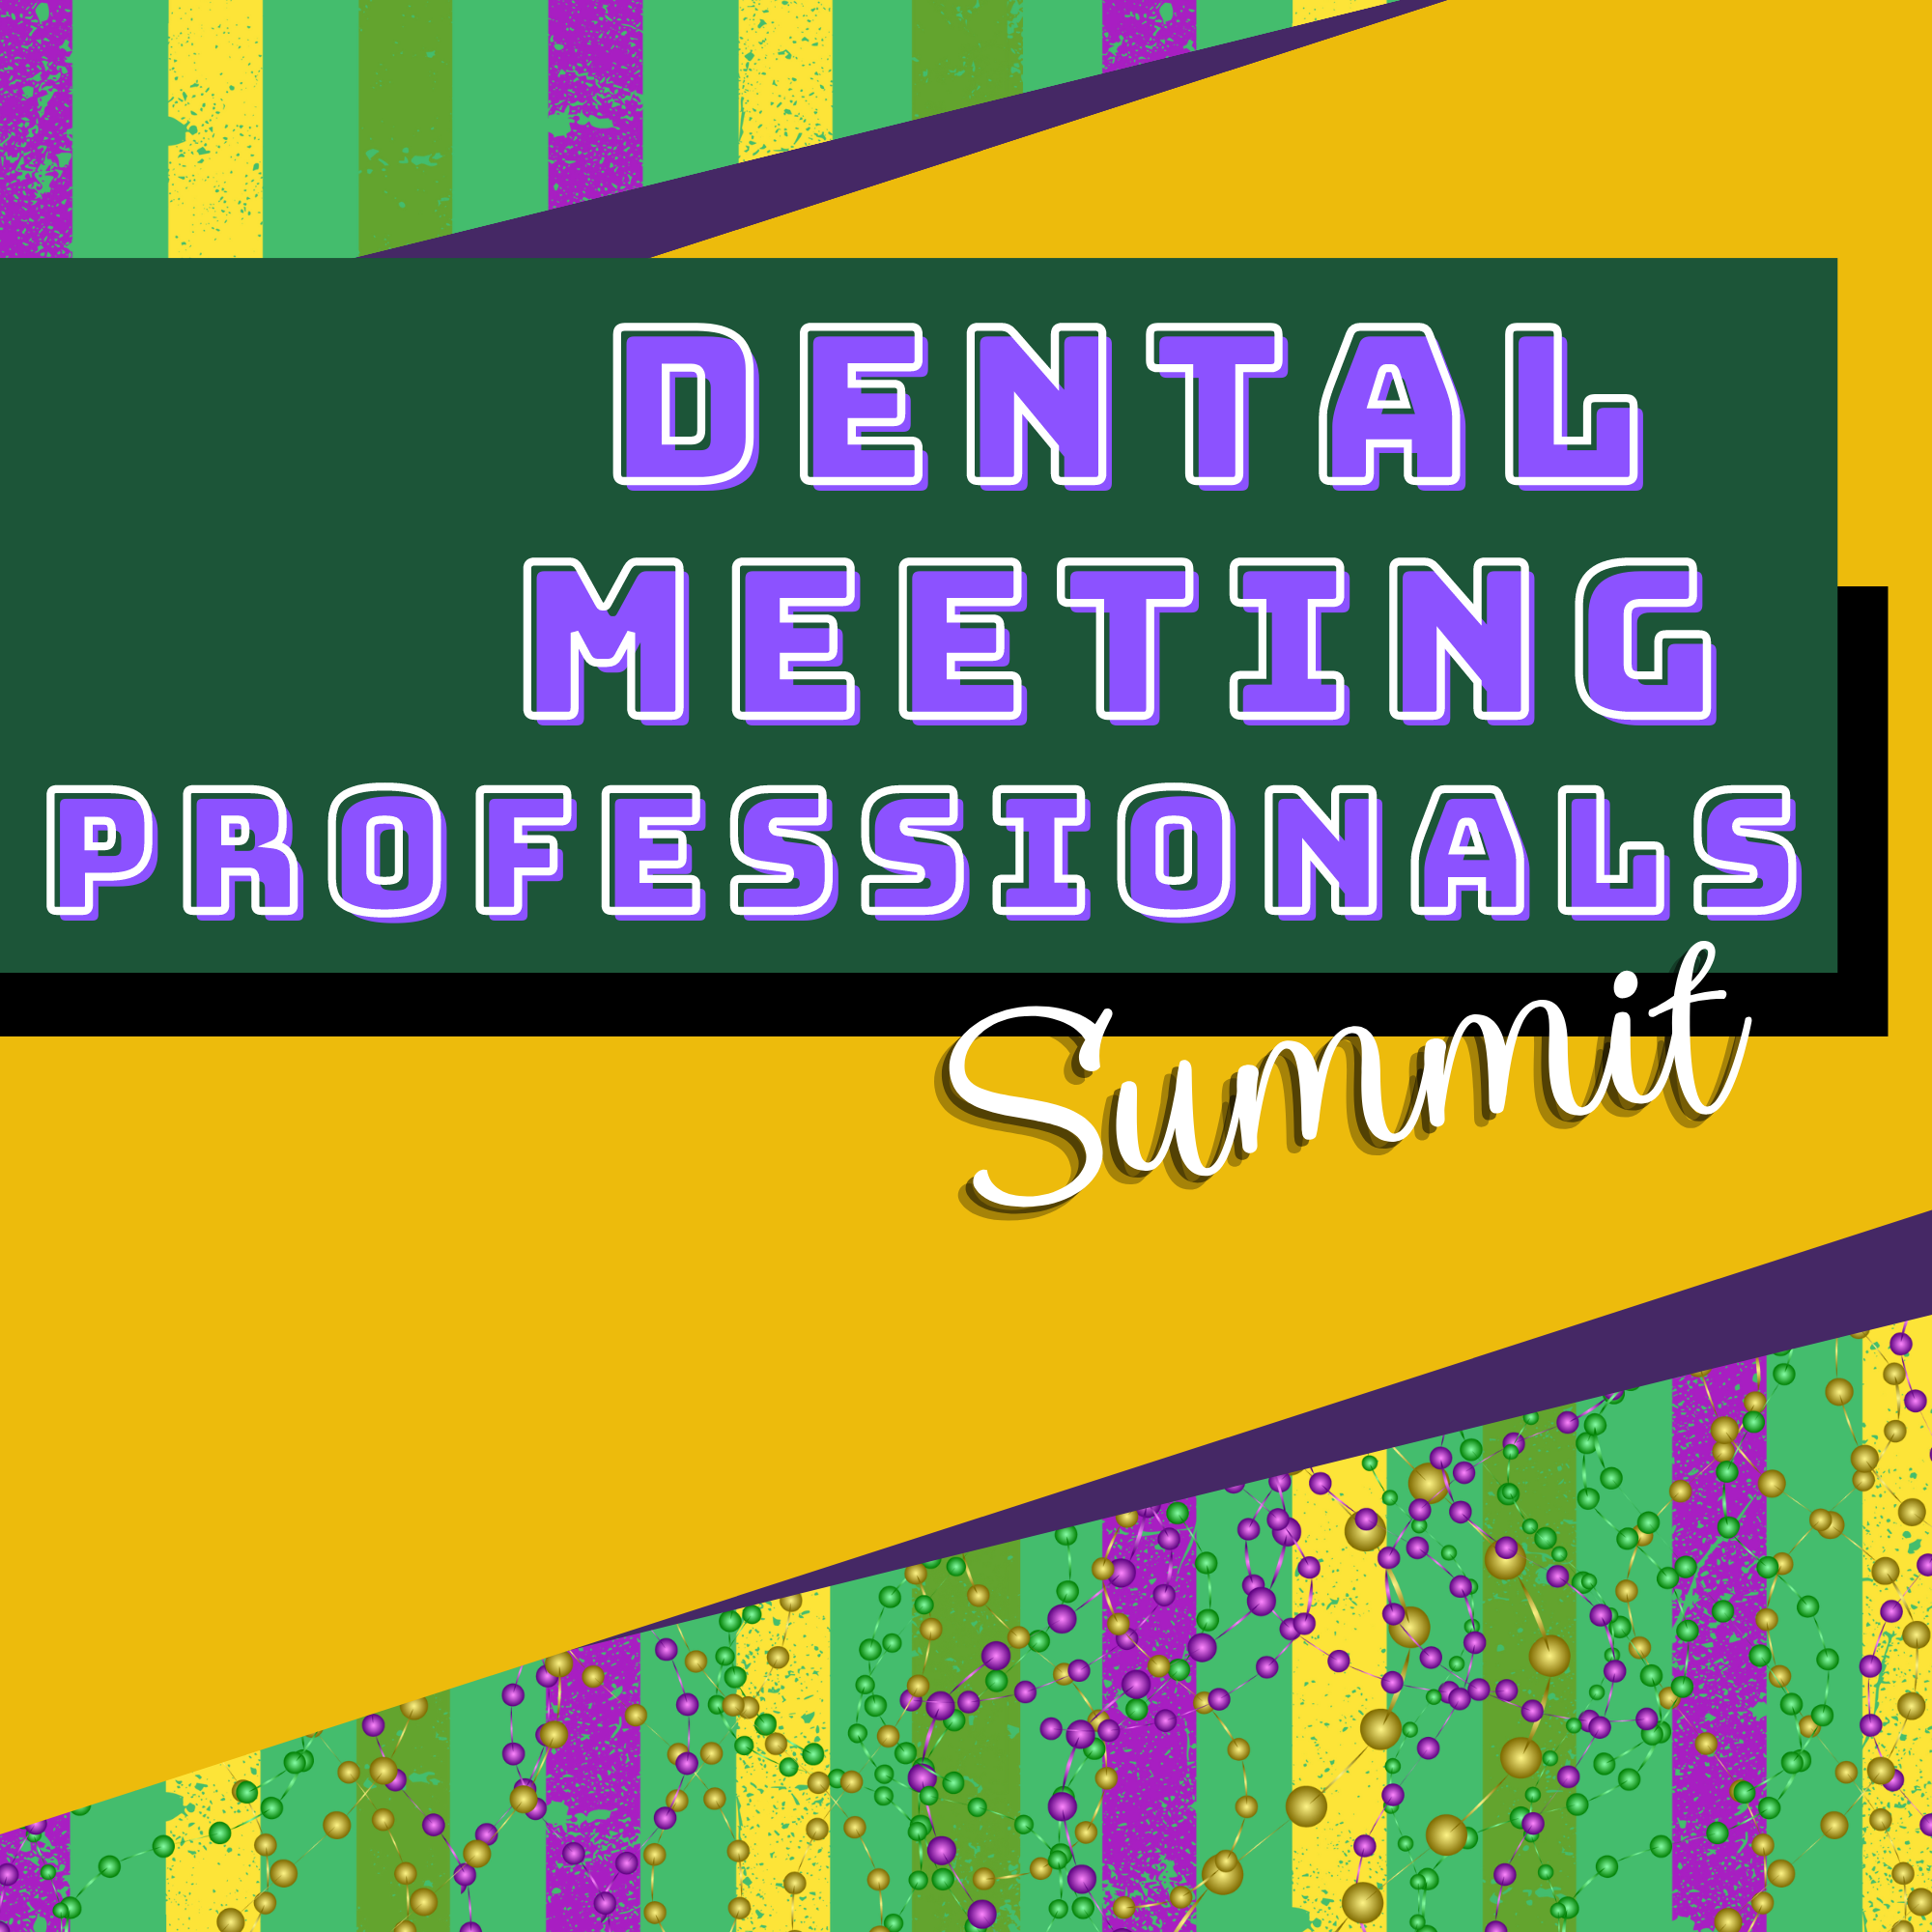 Tenth conference - The dental meeting professionals | Discover the latest trends impacting the dental industry